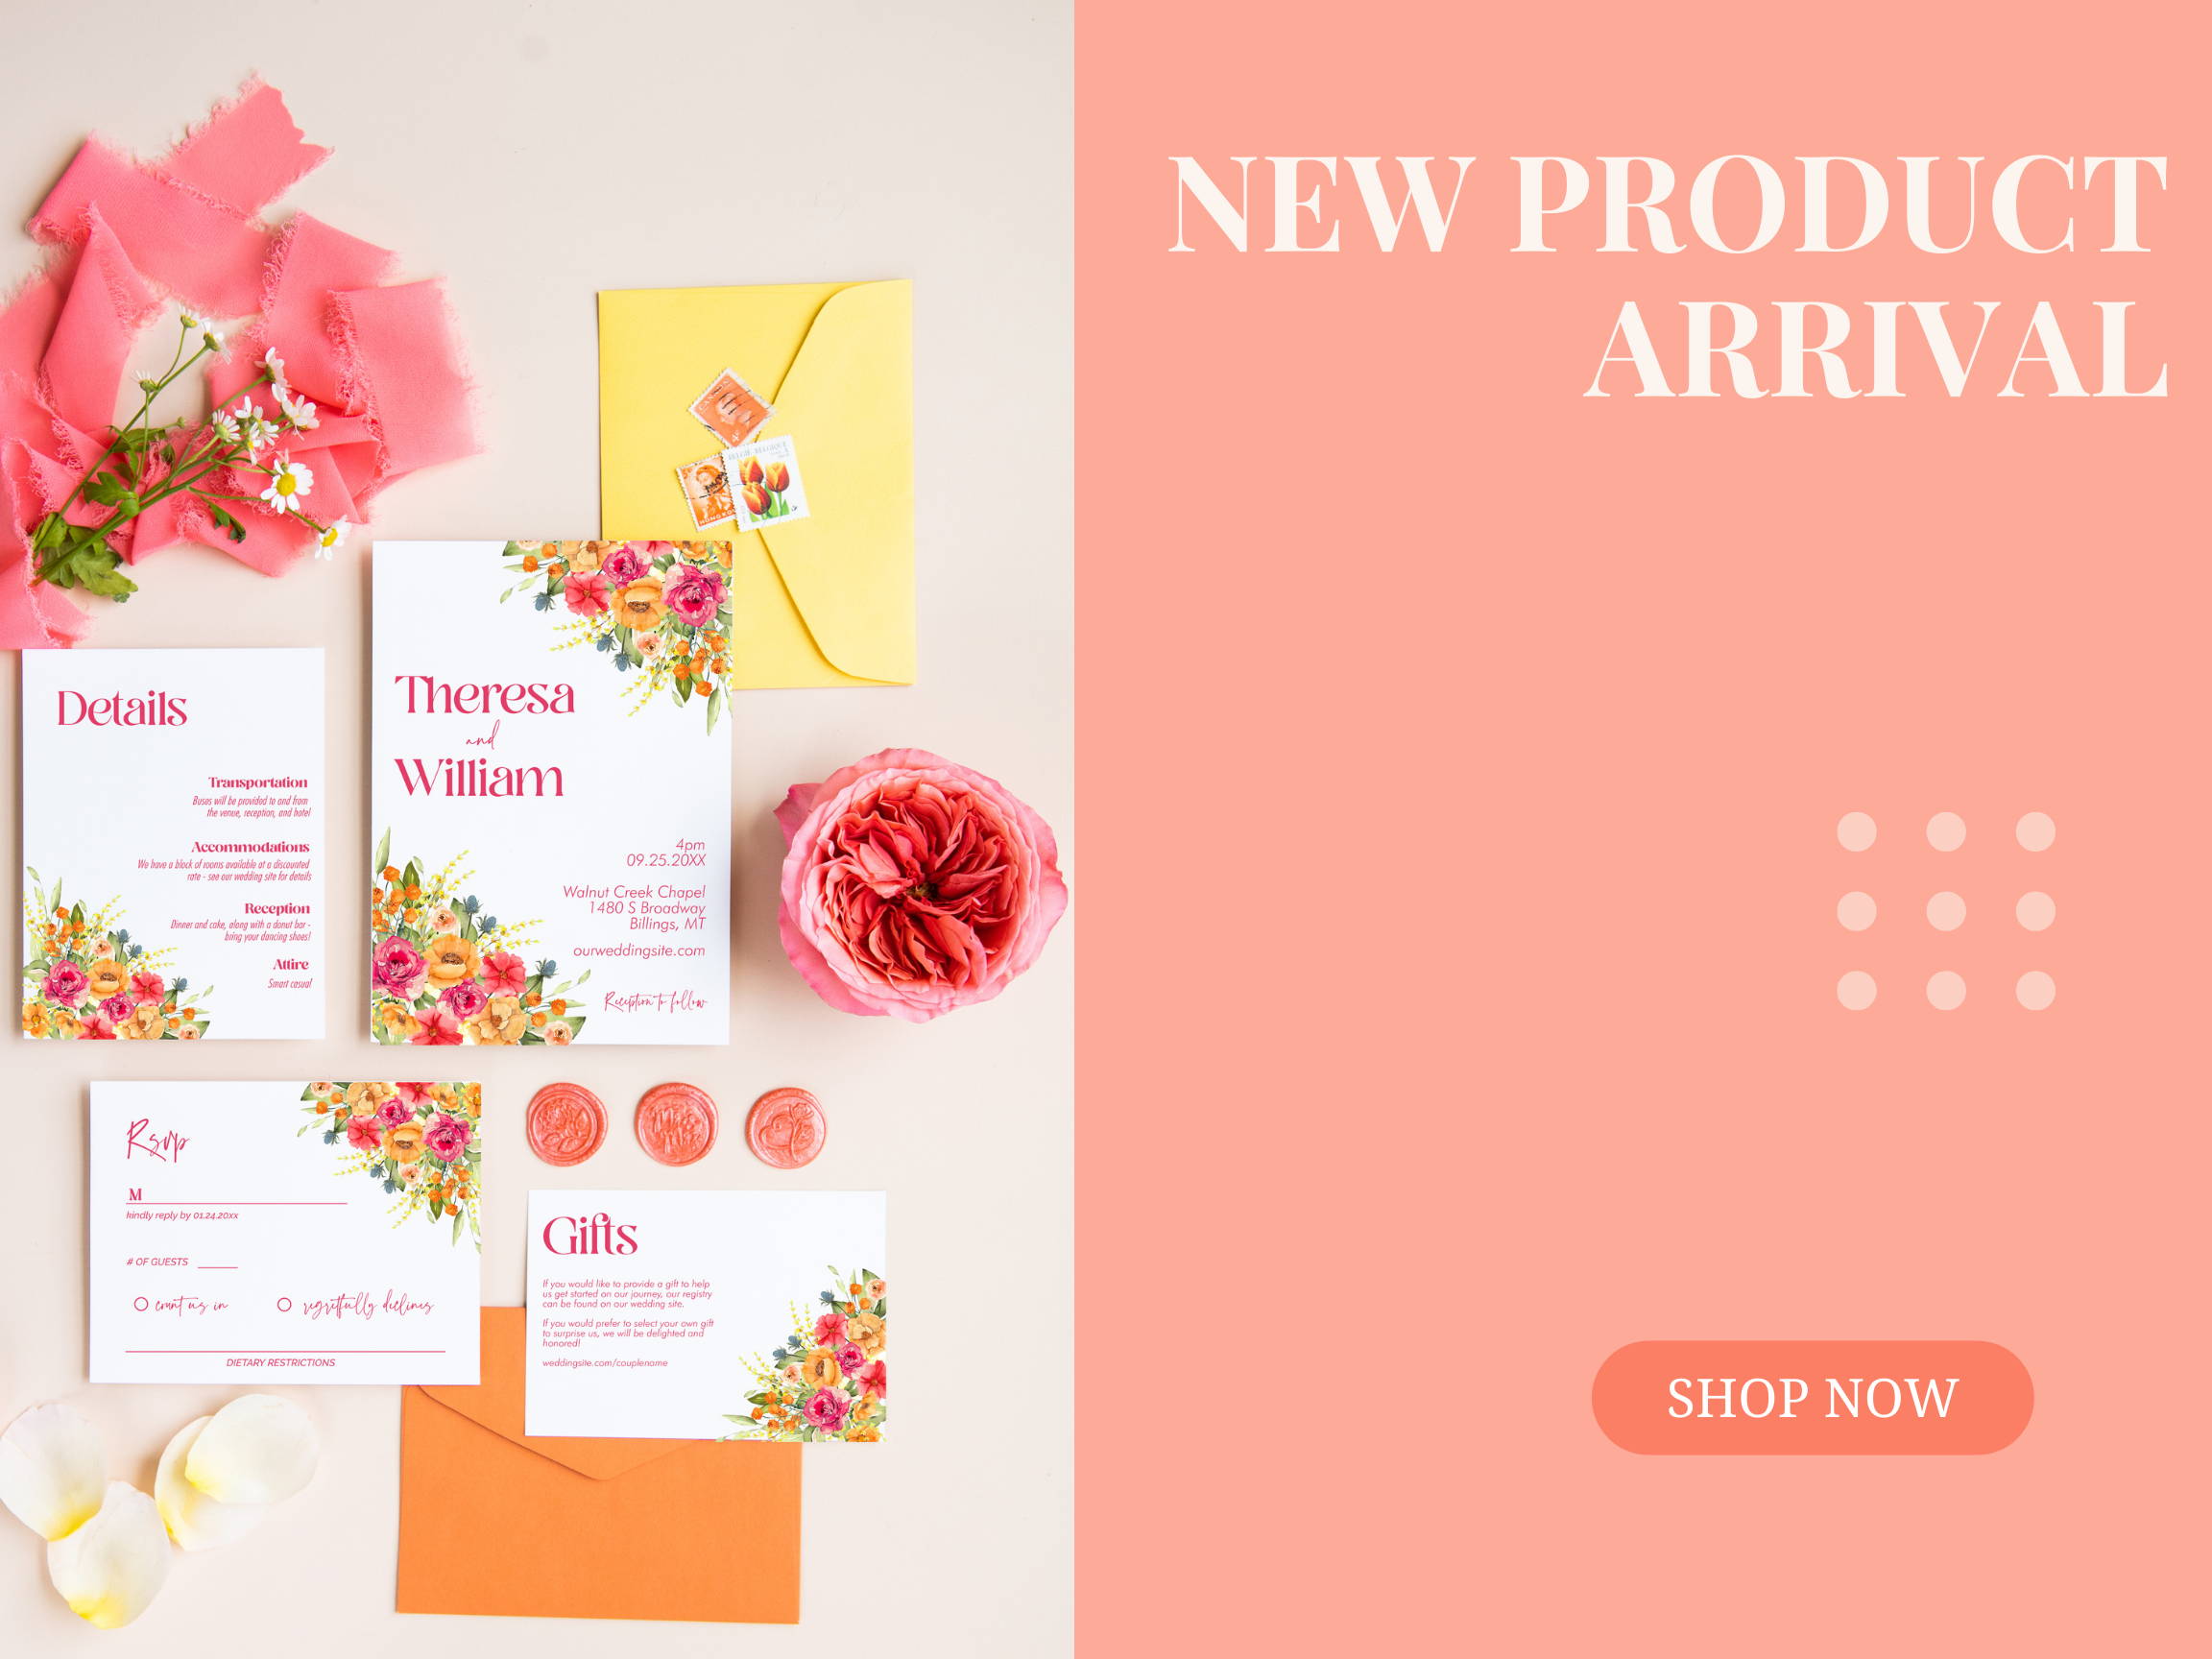 A New Product Arrival announcement featuring the bright and cheerful suite with multicolored envelopes and flowers  